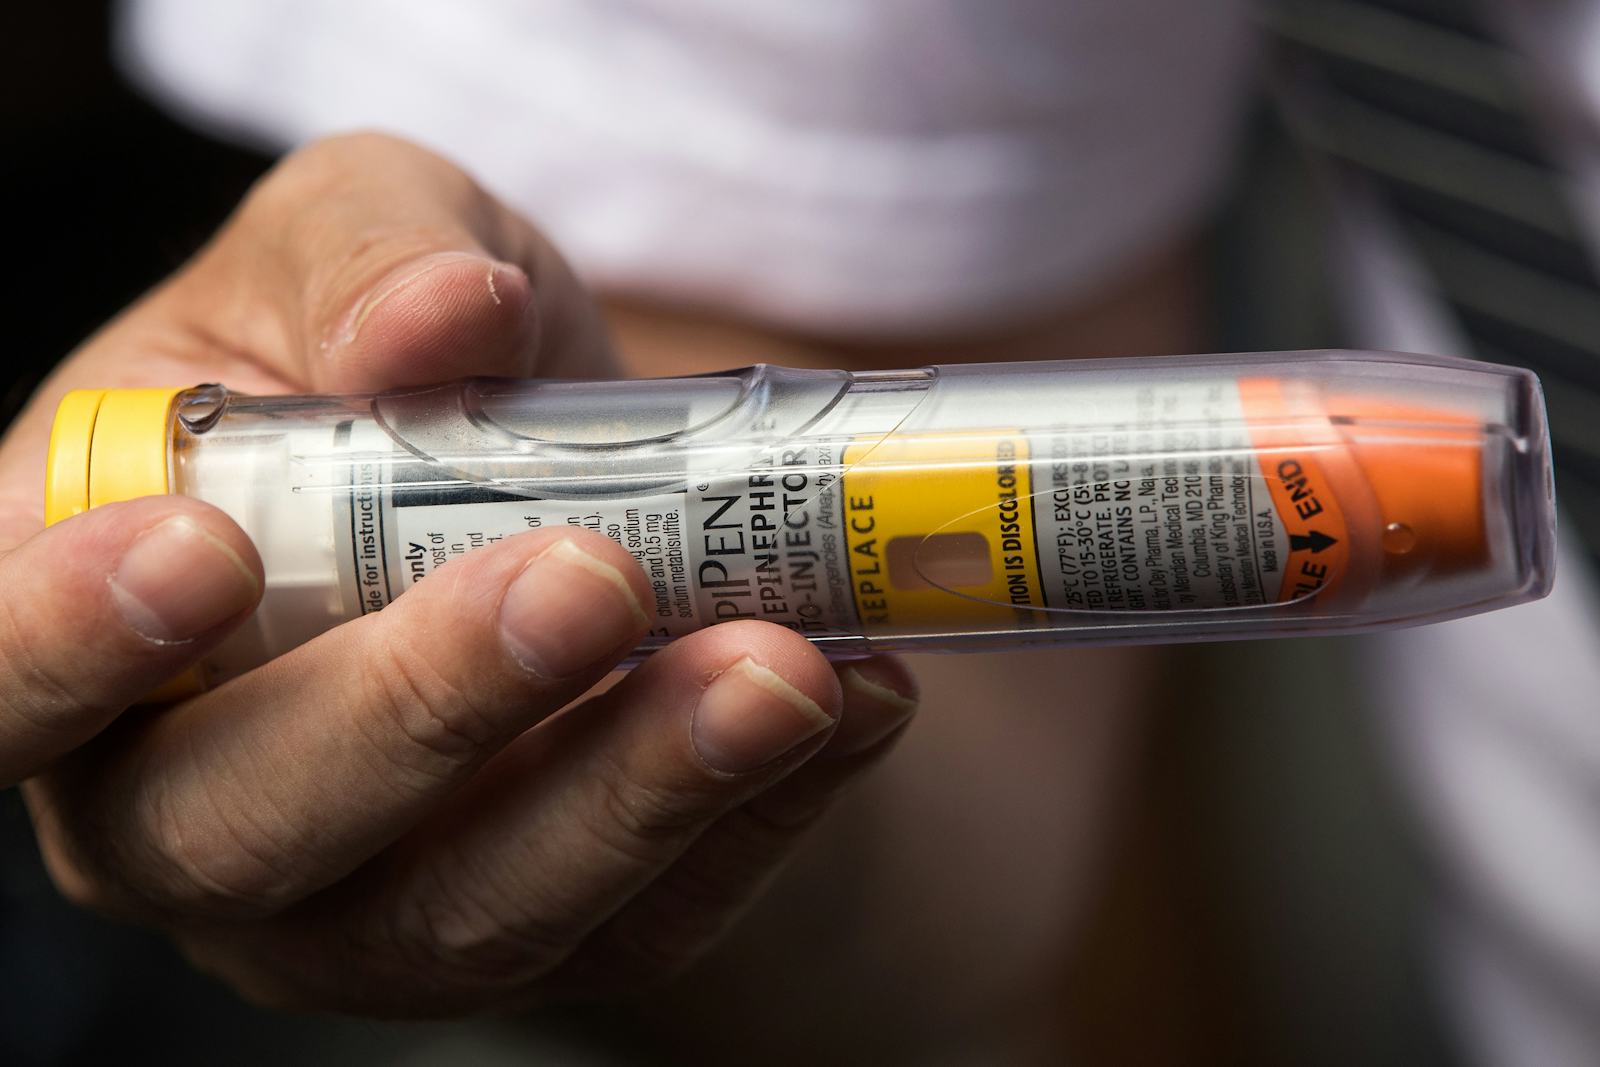 Mylan EpiPen Shortage Is Affecting Consumers In The U.S., According To